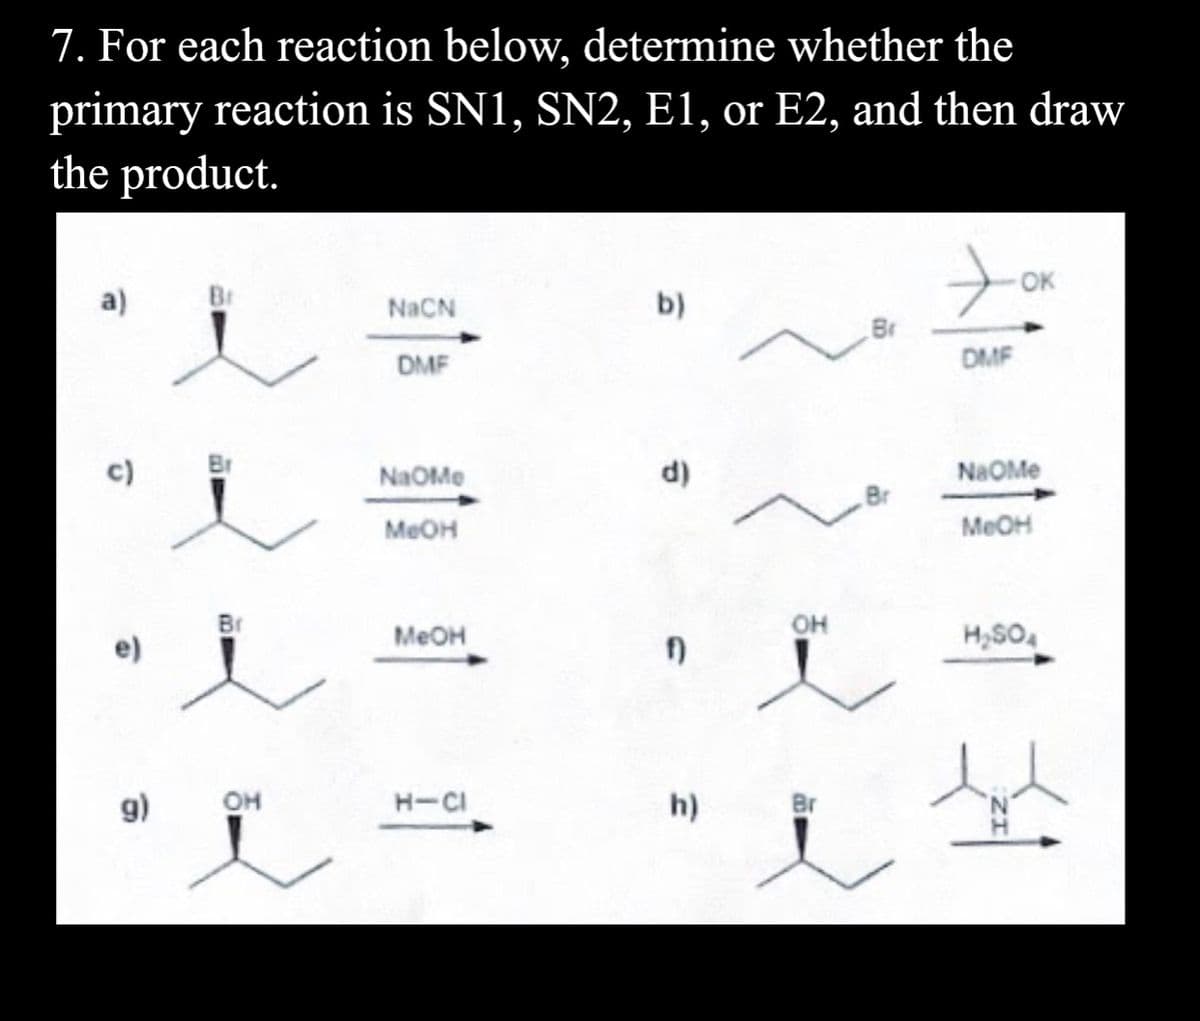 7. For each reaction below, determine whether the
primary reaction is SN1, SN2, E1, or E2, and then draw
the product.
OK
a)
NACN
b)
DMF
DMF
c)
Br
NaOMe
d)
NaOMe
Br
MEOH
MEOH
MEOH
он
H,SO
g)
он
H-CI
h)
Br
